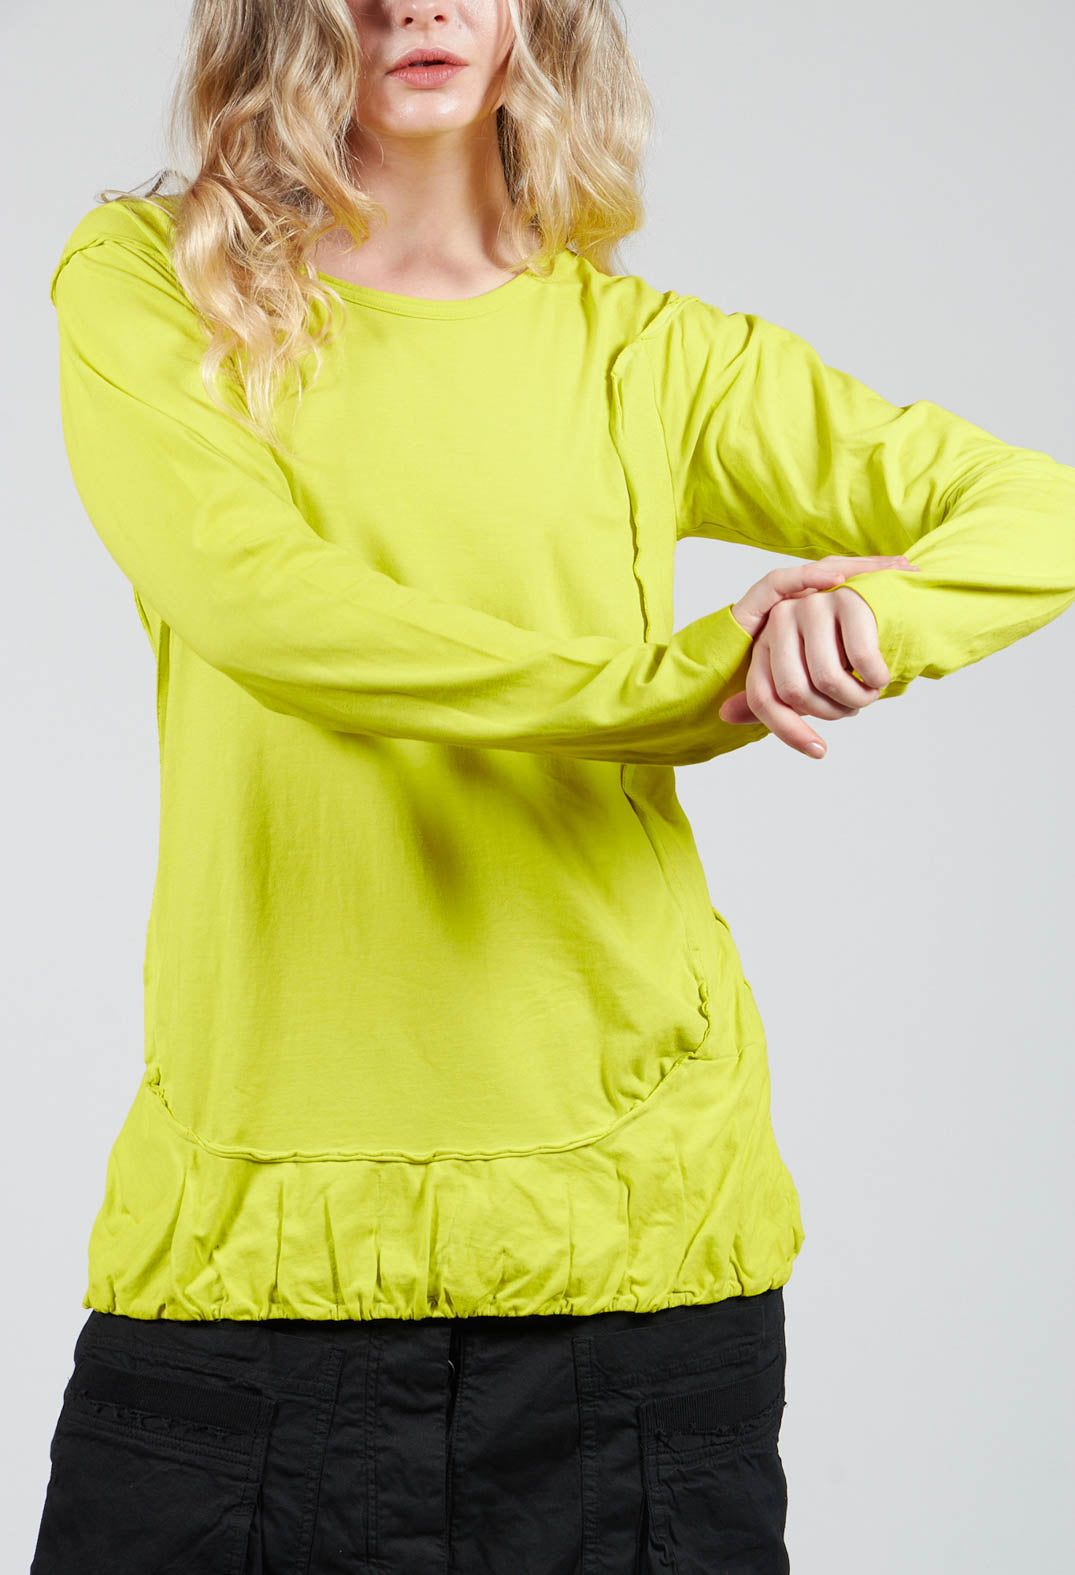 Long Sleeve Jersey T Shirt with Ruffle Hem in Spring